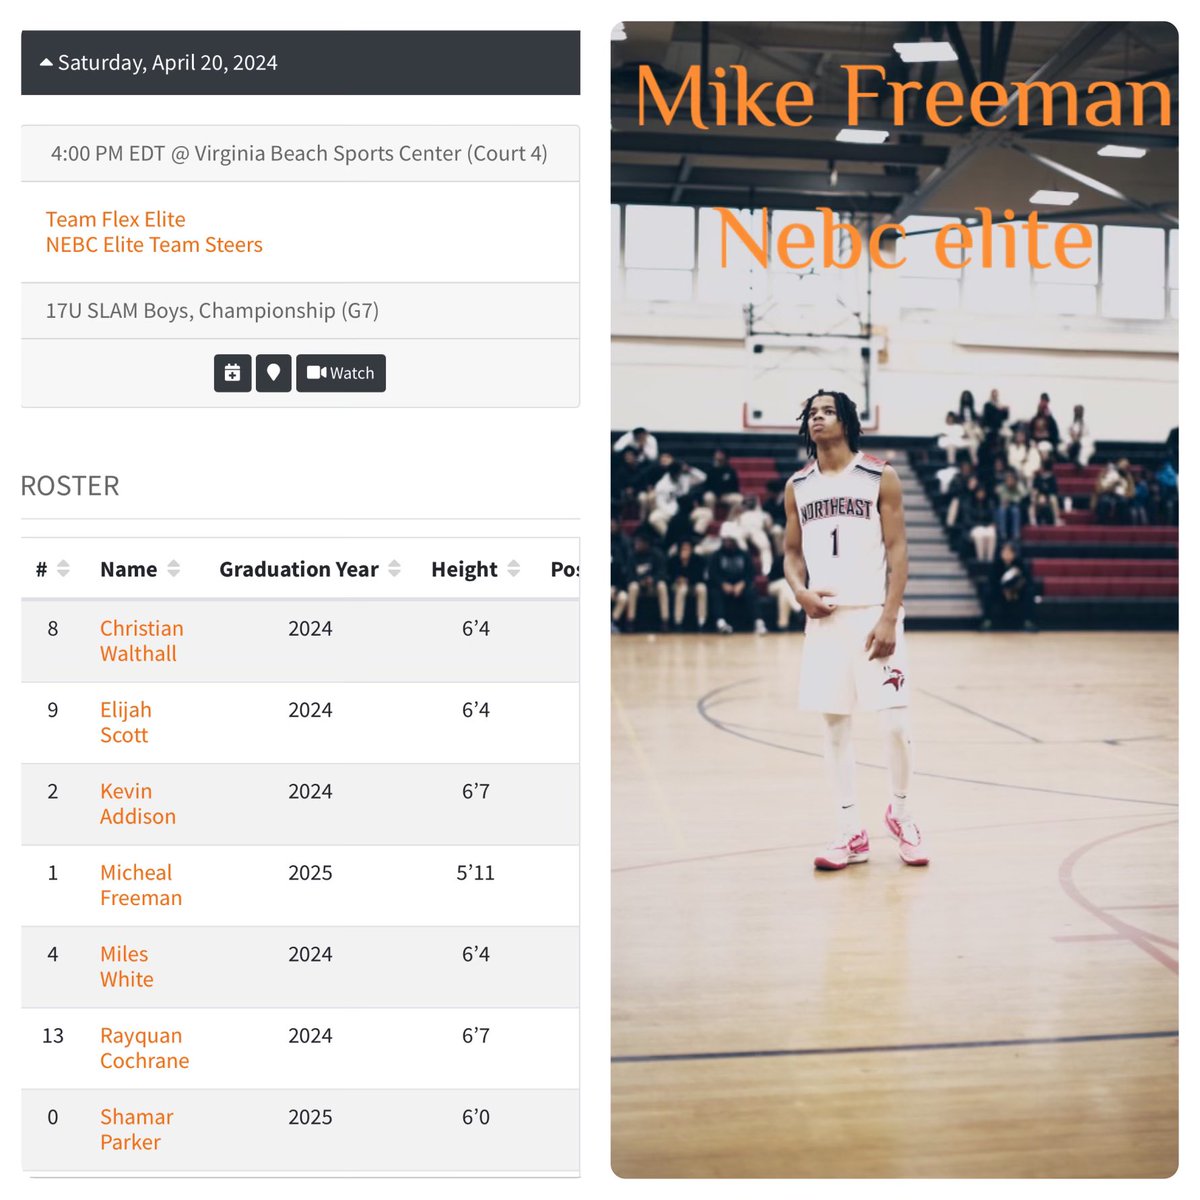 2025 5’11 @1mikeyfreeman is One of best two-way ⛹🏿 in the country. Ready to go @BigShotsGlobal #VirginiaBeach #NEBCELITE #TeamSteers @JusSteers0  Let’s Go @BigShotsToday @BigShotsFilms